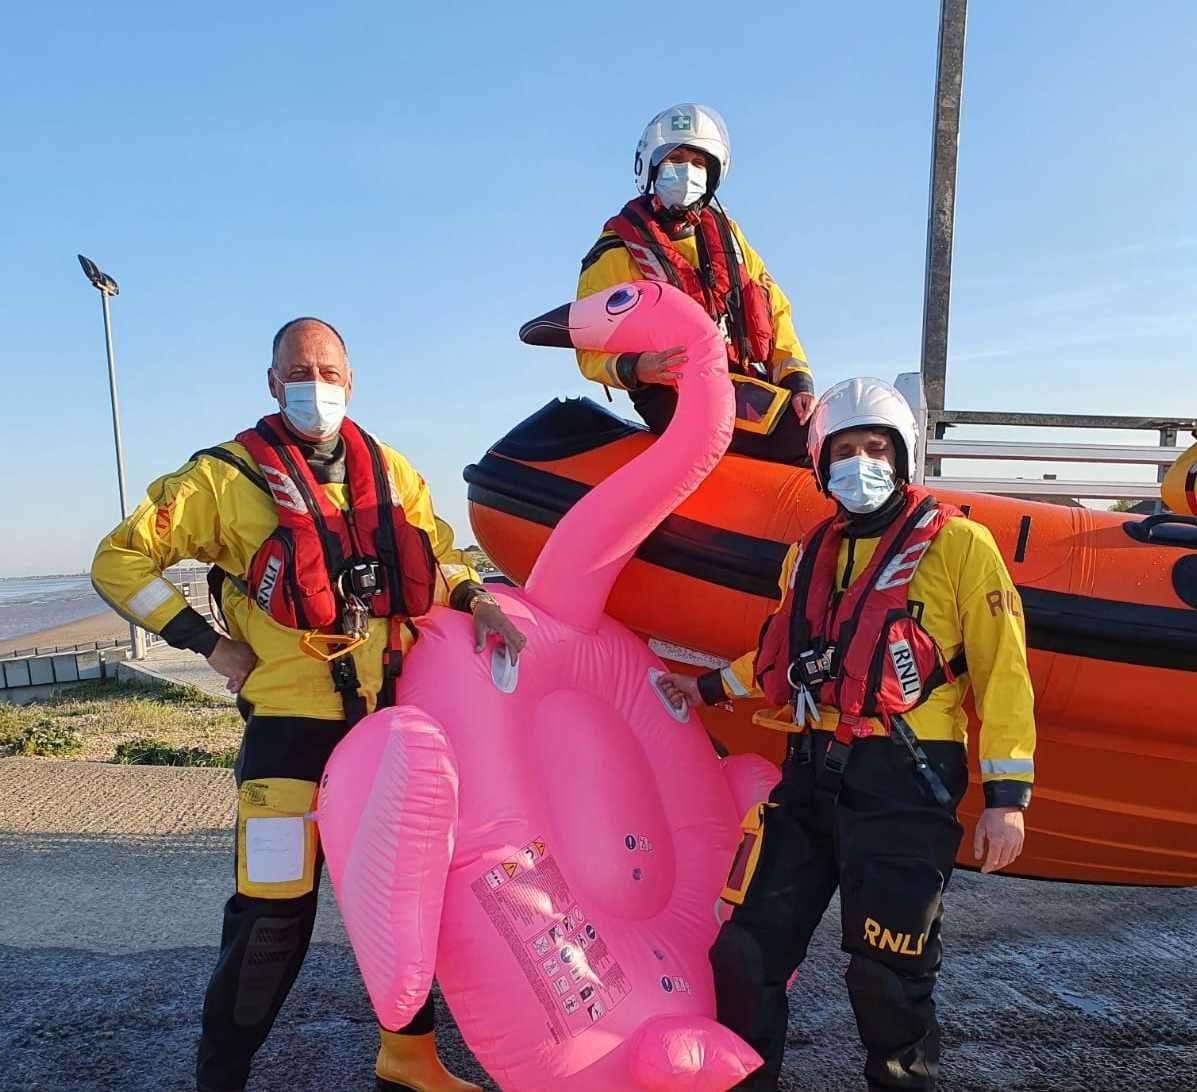 RNLI volunteers John Ruffhead (helm), Heather Crittenden (trainee helm) and Josh Spiers (boat crew), who helped rescue a pink flamingo from the sea. Picture: Littlestone Lifeboat Station/Adrian Easterling